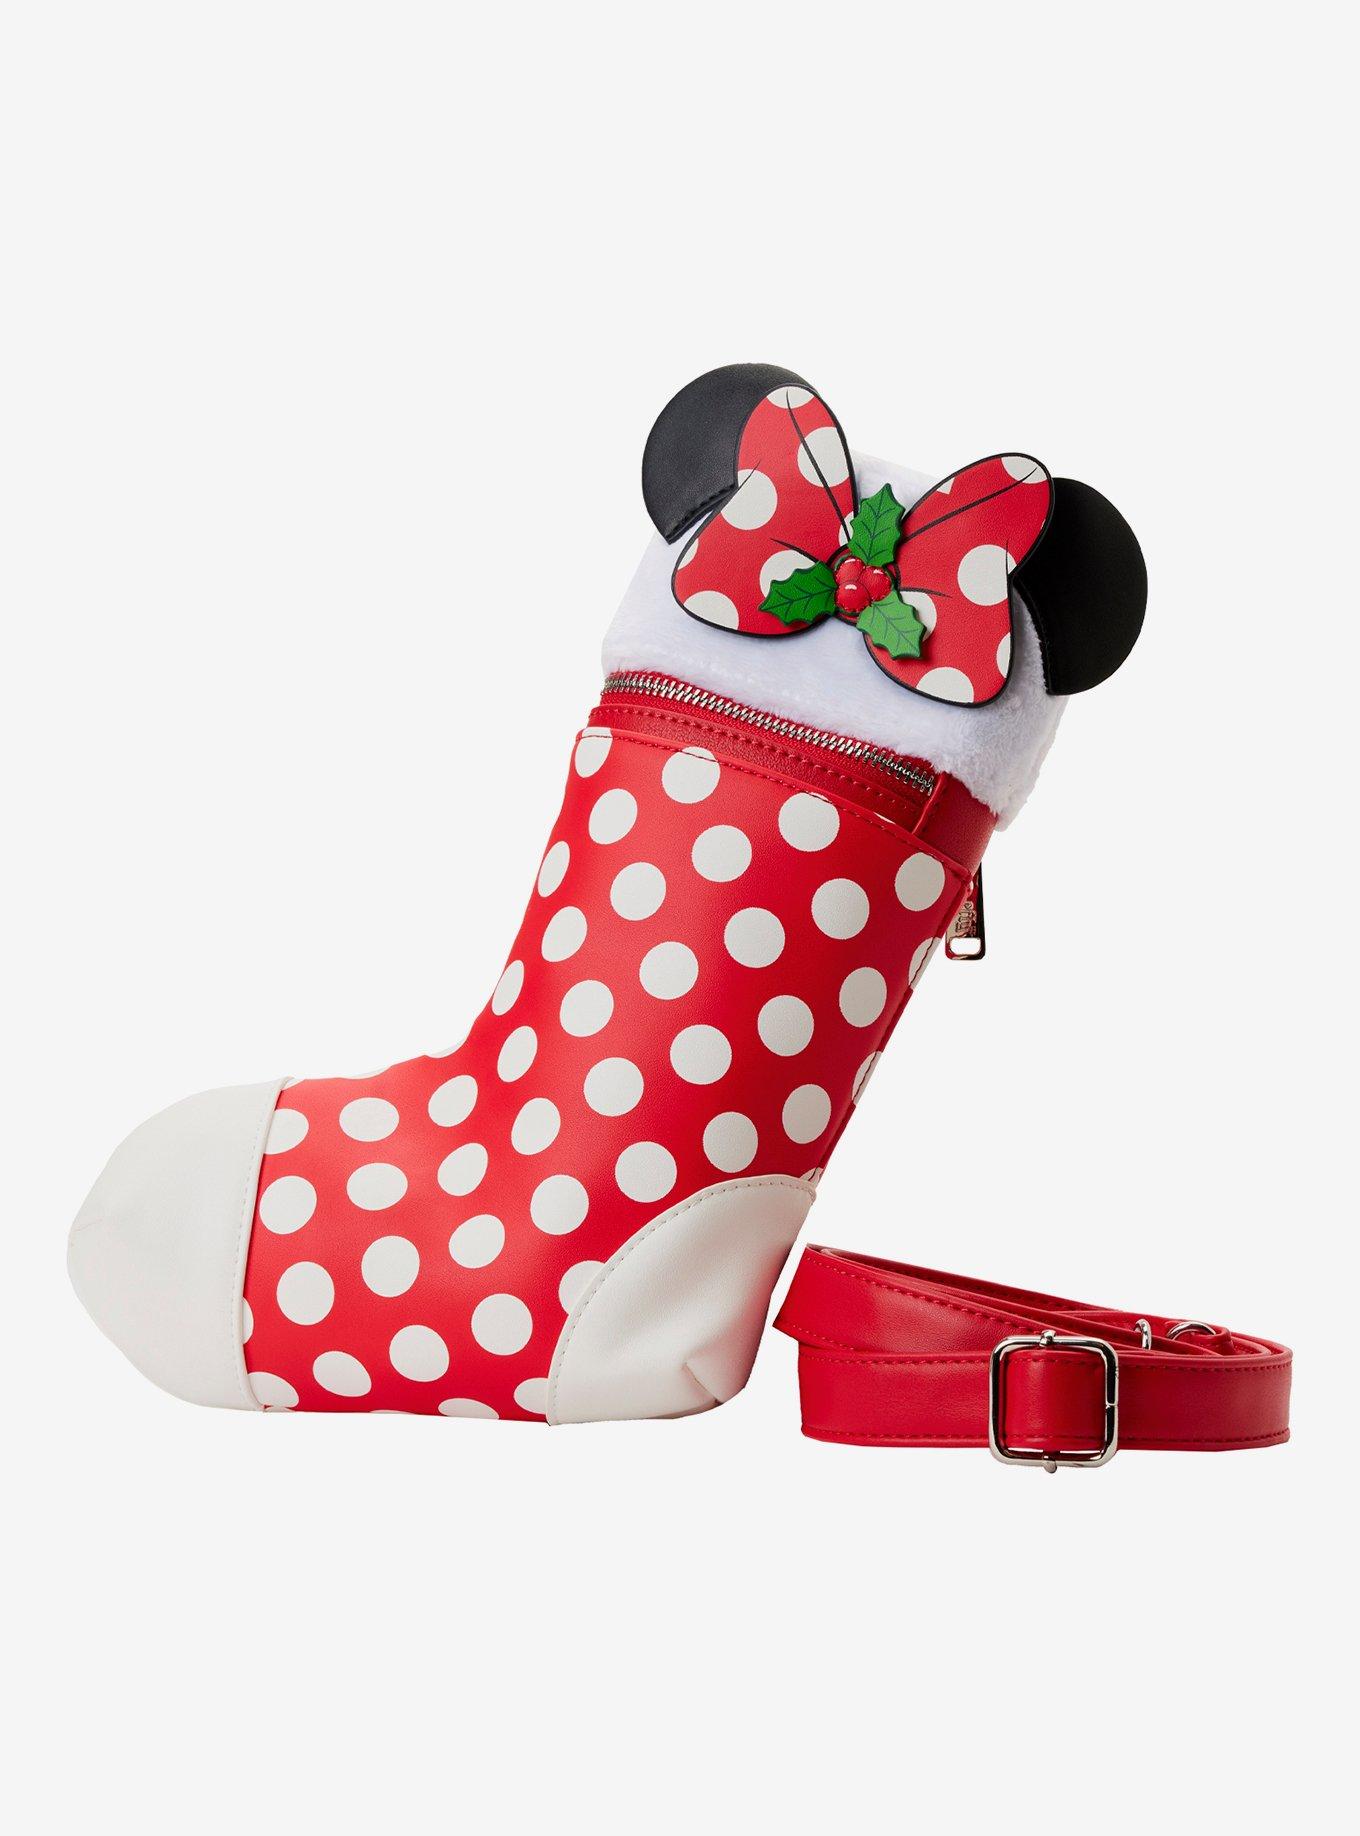 Minnie Lots of Dots Park Pack